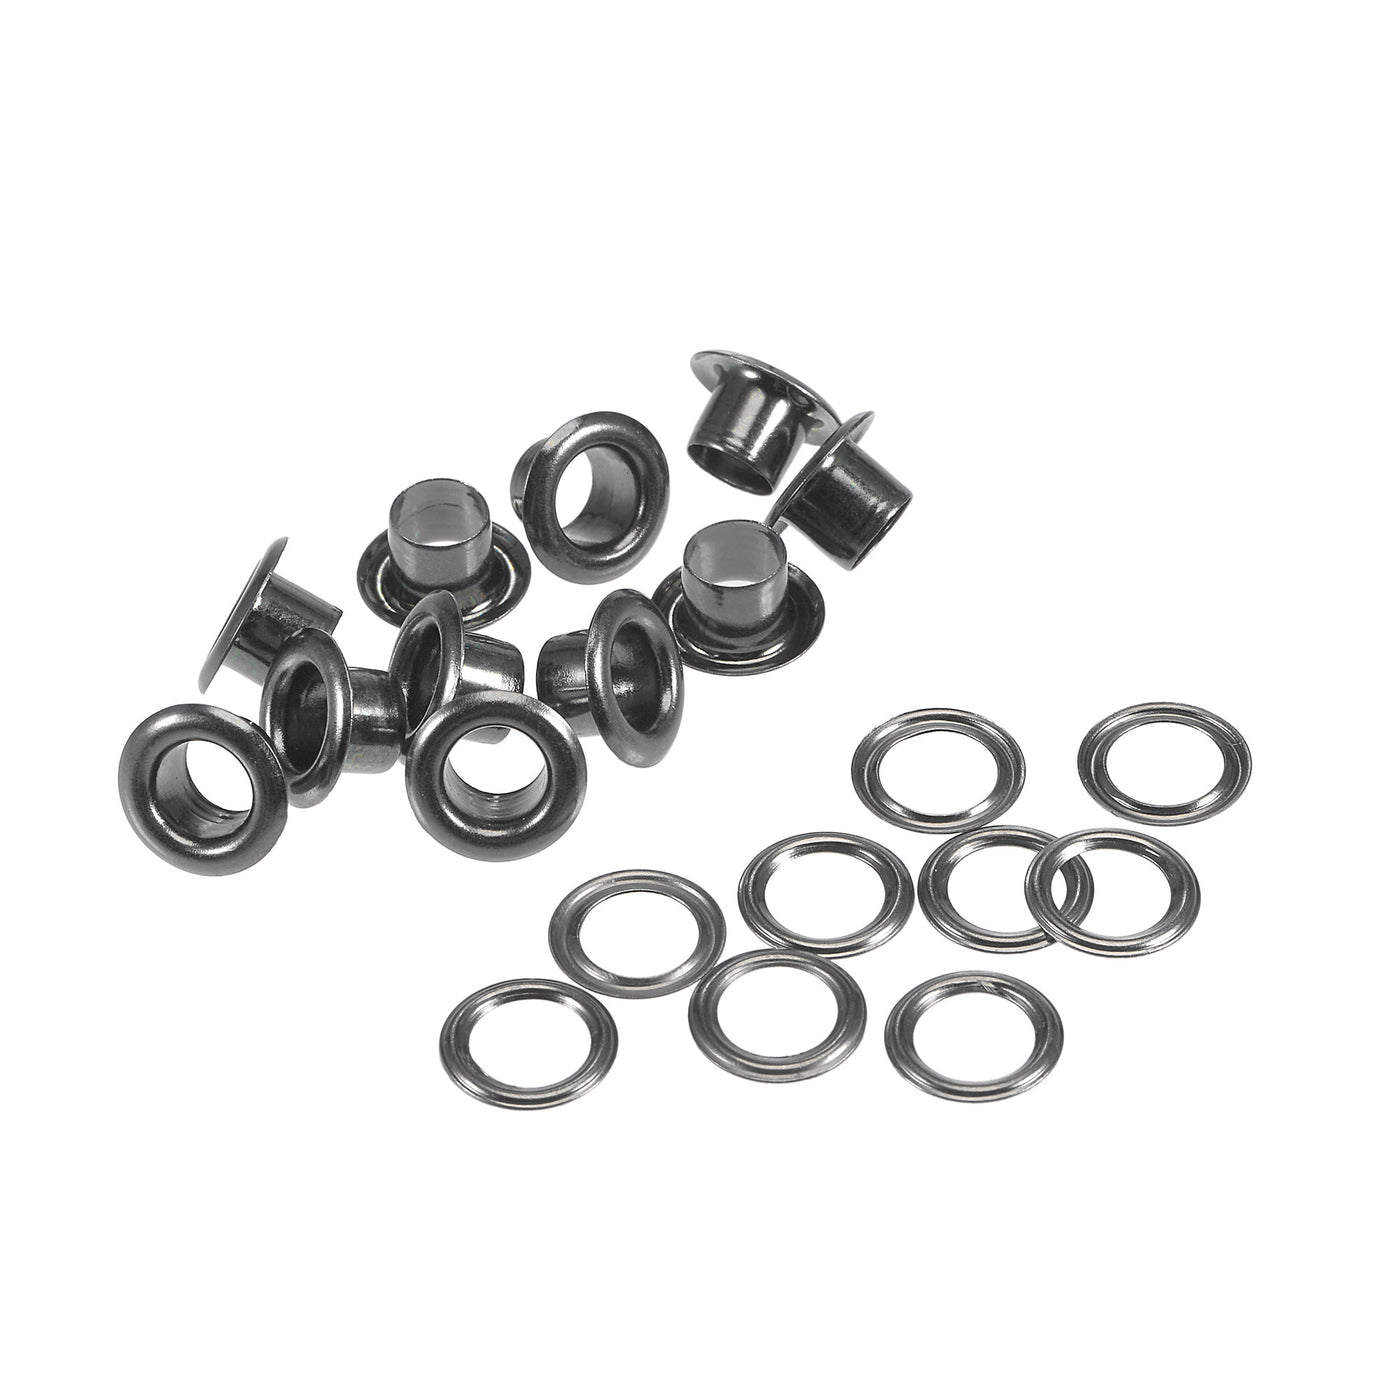 uxcell Uxcell Eyelet with Washer 9.5x5x4.5mm Copper Grommet Chrome Plated Black 100 Set